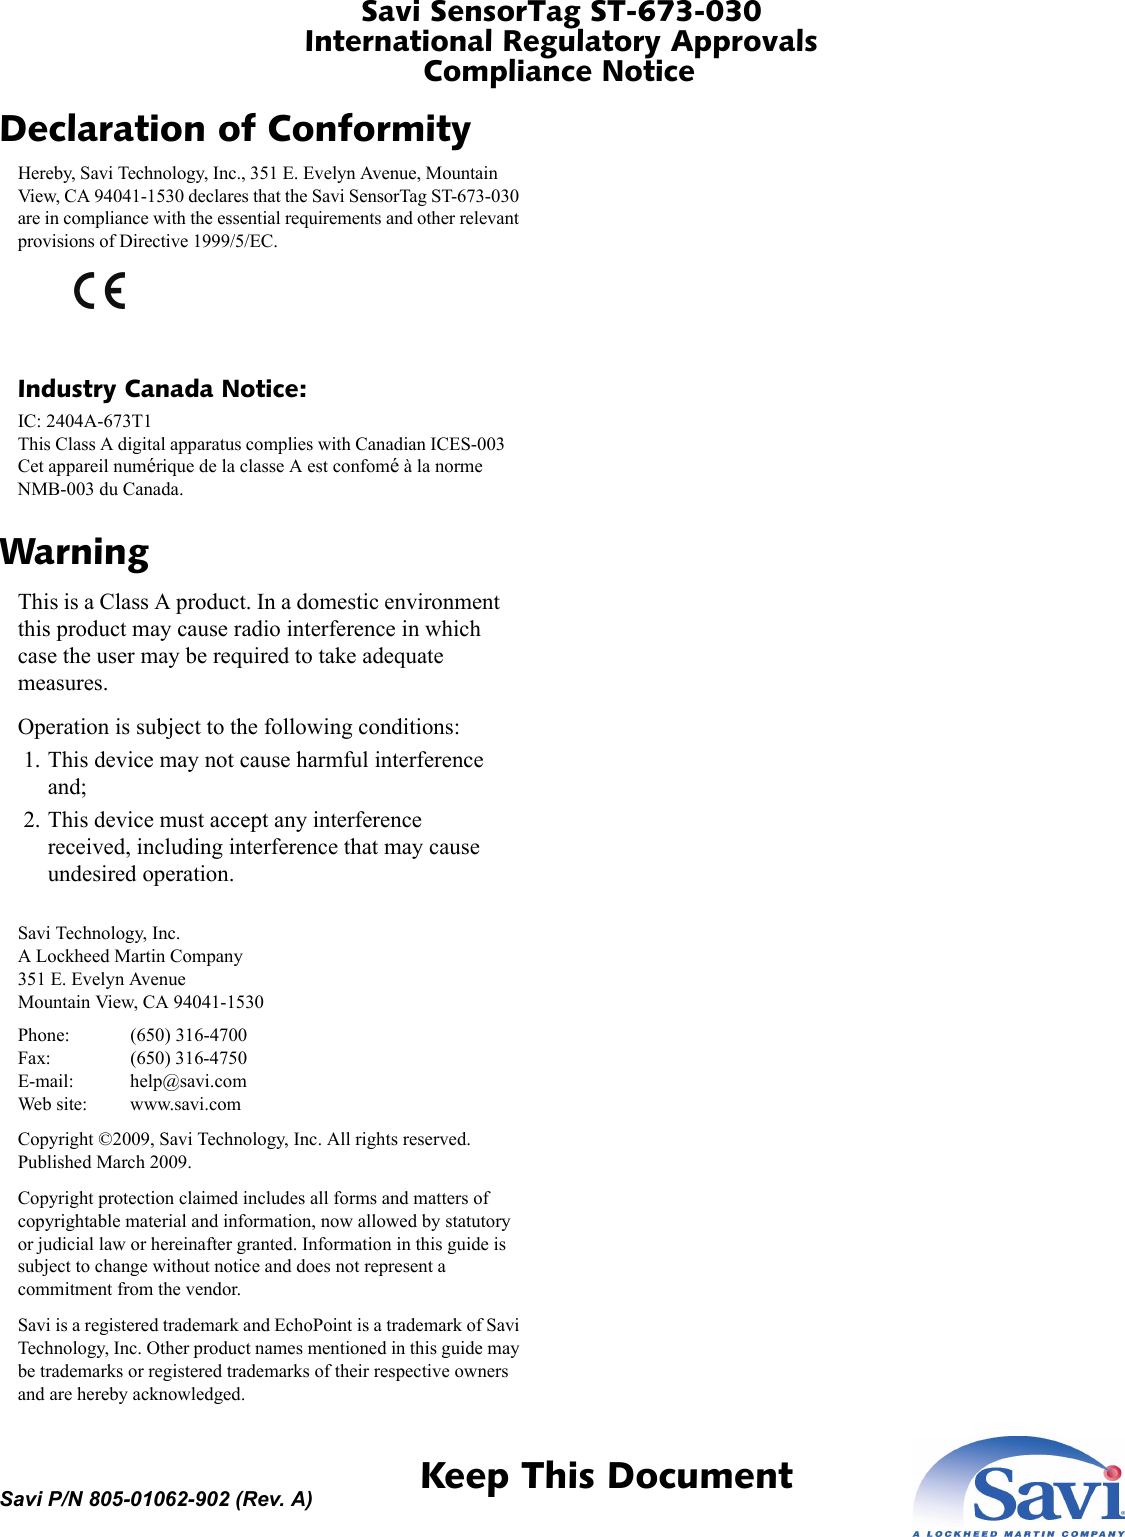 Savi SensorTag ST-673-030International Regulatory ApprovalsCompliance Notice 1  Keep This DocumentSavi P/N 805-01062-902 (Rev. A)Declaration of ConformityHereby, Savi Technology, Inc., 351 E. Evelyn Avenue, Mountain View, CA 94041-1530 declares that the Savi SensorTag ST-673-030 are in compliance with the essential requirements and other relevant provisions of Directive 1999/5/EC.Industry Canada Notice:IC: 2404A-673T1 This Class A digital apparatus complies with Canadian ICES-003 Cet appareil numérique de la classe A est confomé à la norme NMB-003 du Canada.WarningThis is a Class A product. In a domestic environment this product may cause radio interference in which case the user may be required to take adequate measures.Operation is subject to the following conditions: 1. This device may not cause harmful interference and; 2. This device must accept any interference received, including interference that may cause undesired operation.Savi Technology, Inc. A Lockheed Martin Company 351 E. Evelyn Avenue Mountain View, CA 94041-1530Phone: (650) 316-4700 Fax: (650) 316-4750 E-mail: help@savi.com Web site: www.savi.comCopyright ©2009, Savi Technology, Inc. All rights reserved. Published March 2009.Copyright protection claimed includes all forms and matters of copyrightable material and information, now allowed by statutory or judicial law or hereinafter granted. Information in this guide is subject to change without notice and does not represent a commitment from the vendor.Savi is a registered trademark and EchoPoint is a trademark of Savi Technology, Inc. Other product names mentioned in this guide may be trademarks or registered trademarks of their respective owners and are hereby acknowledged.